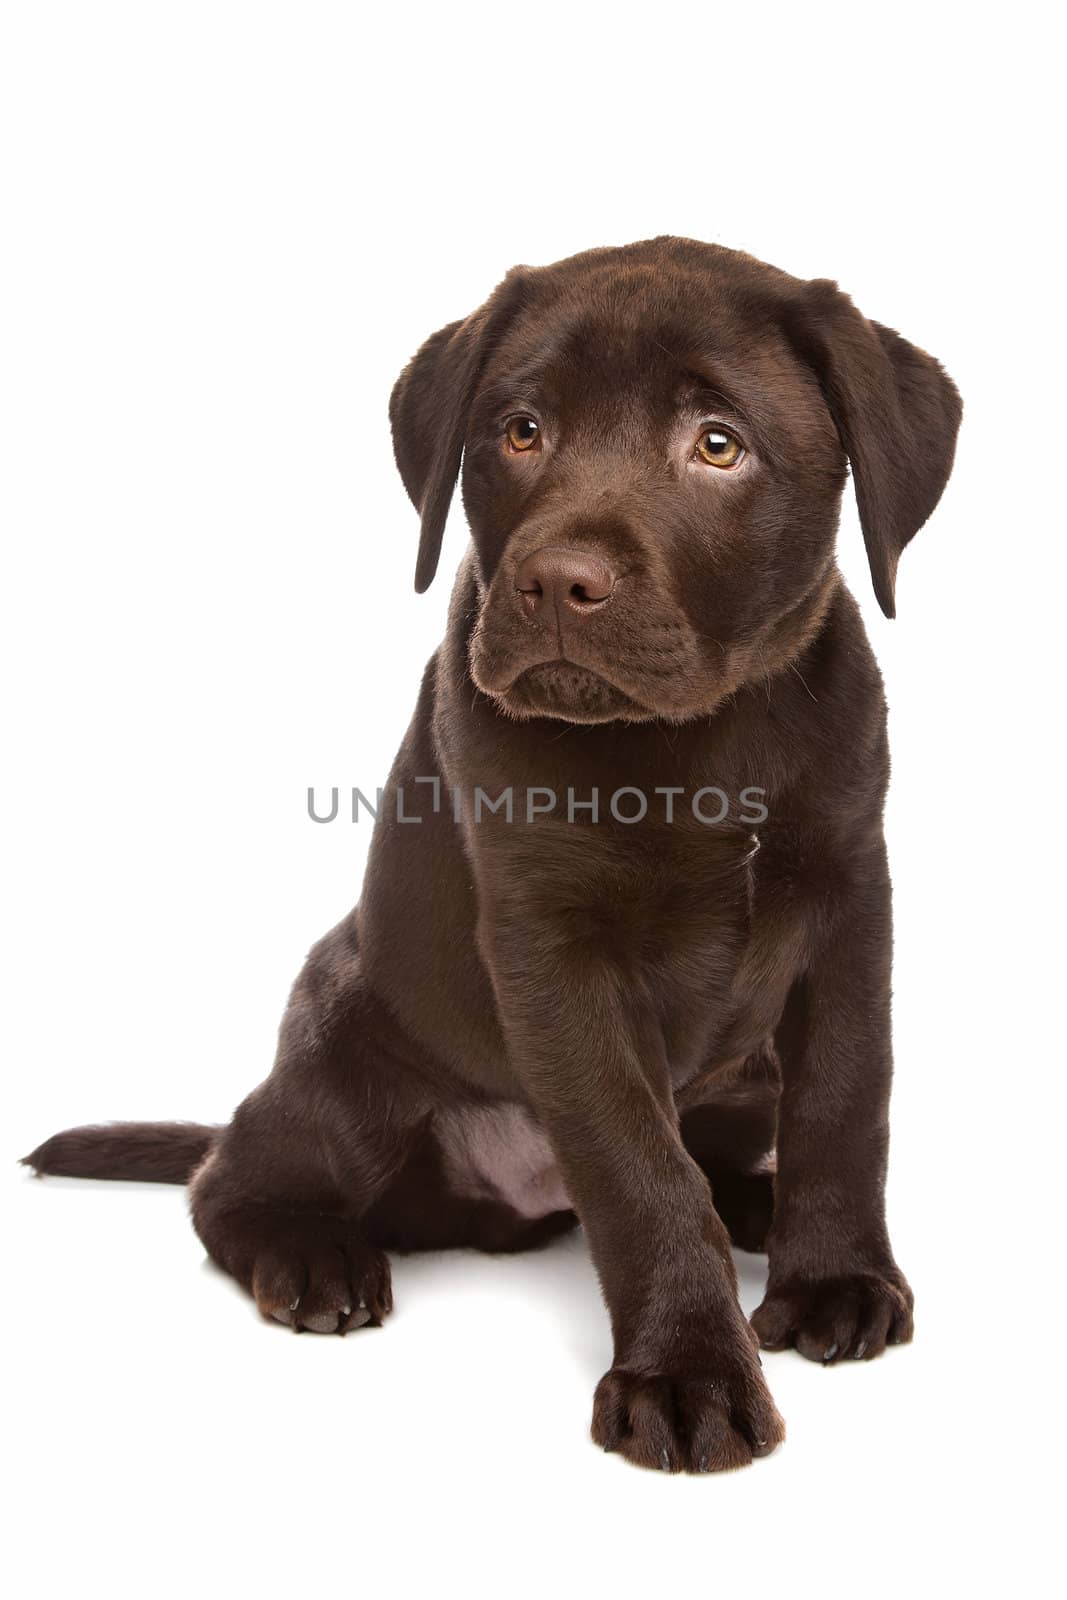 Chocolate Labrador puppy in front of a white background